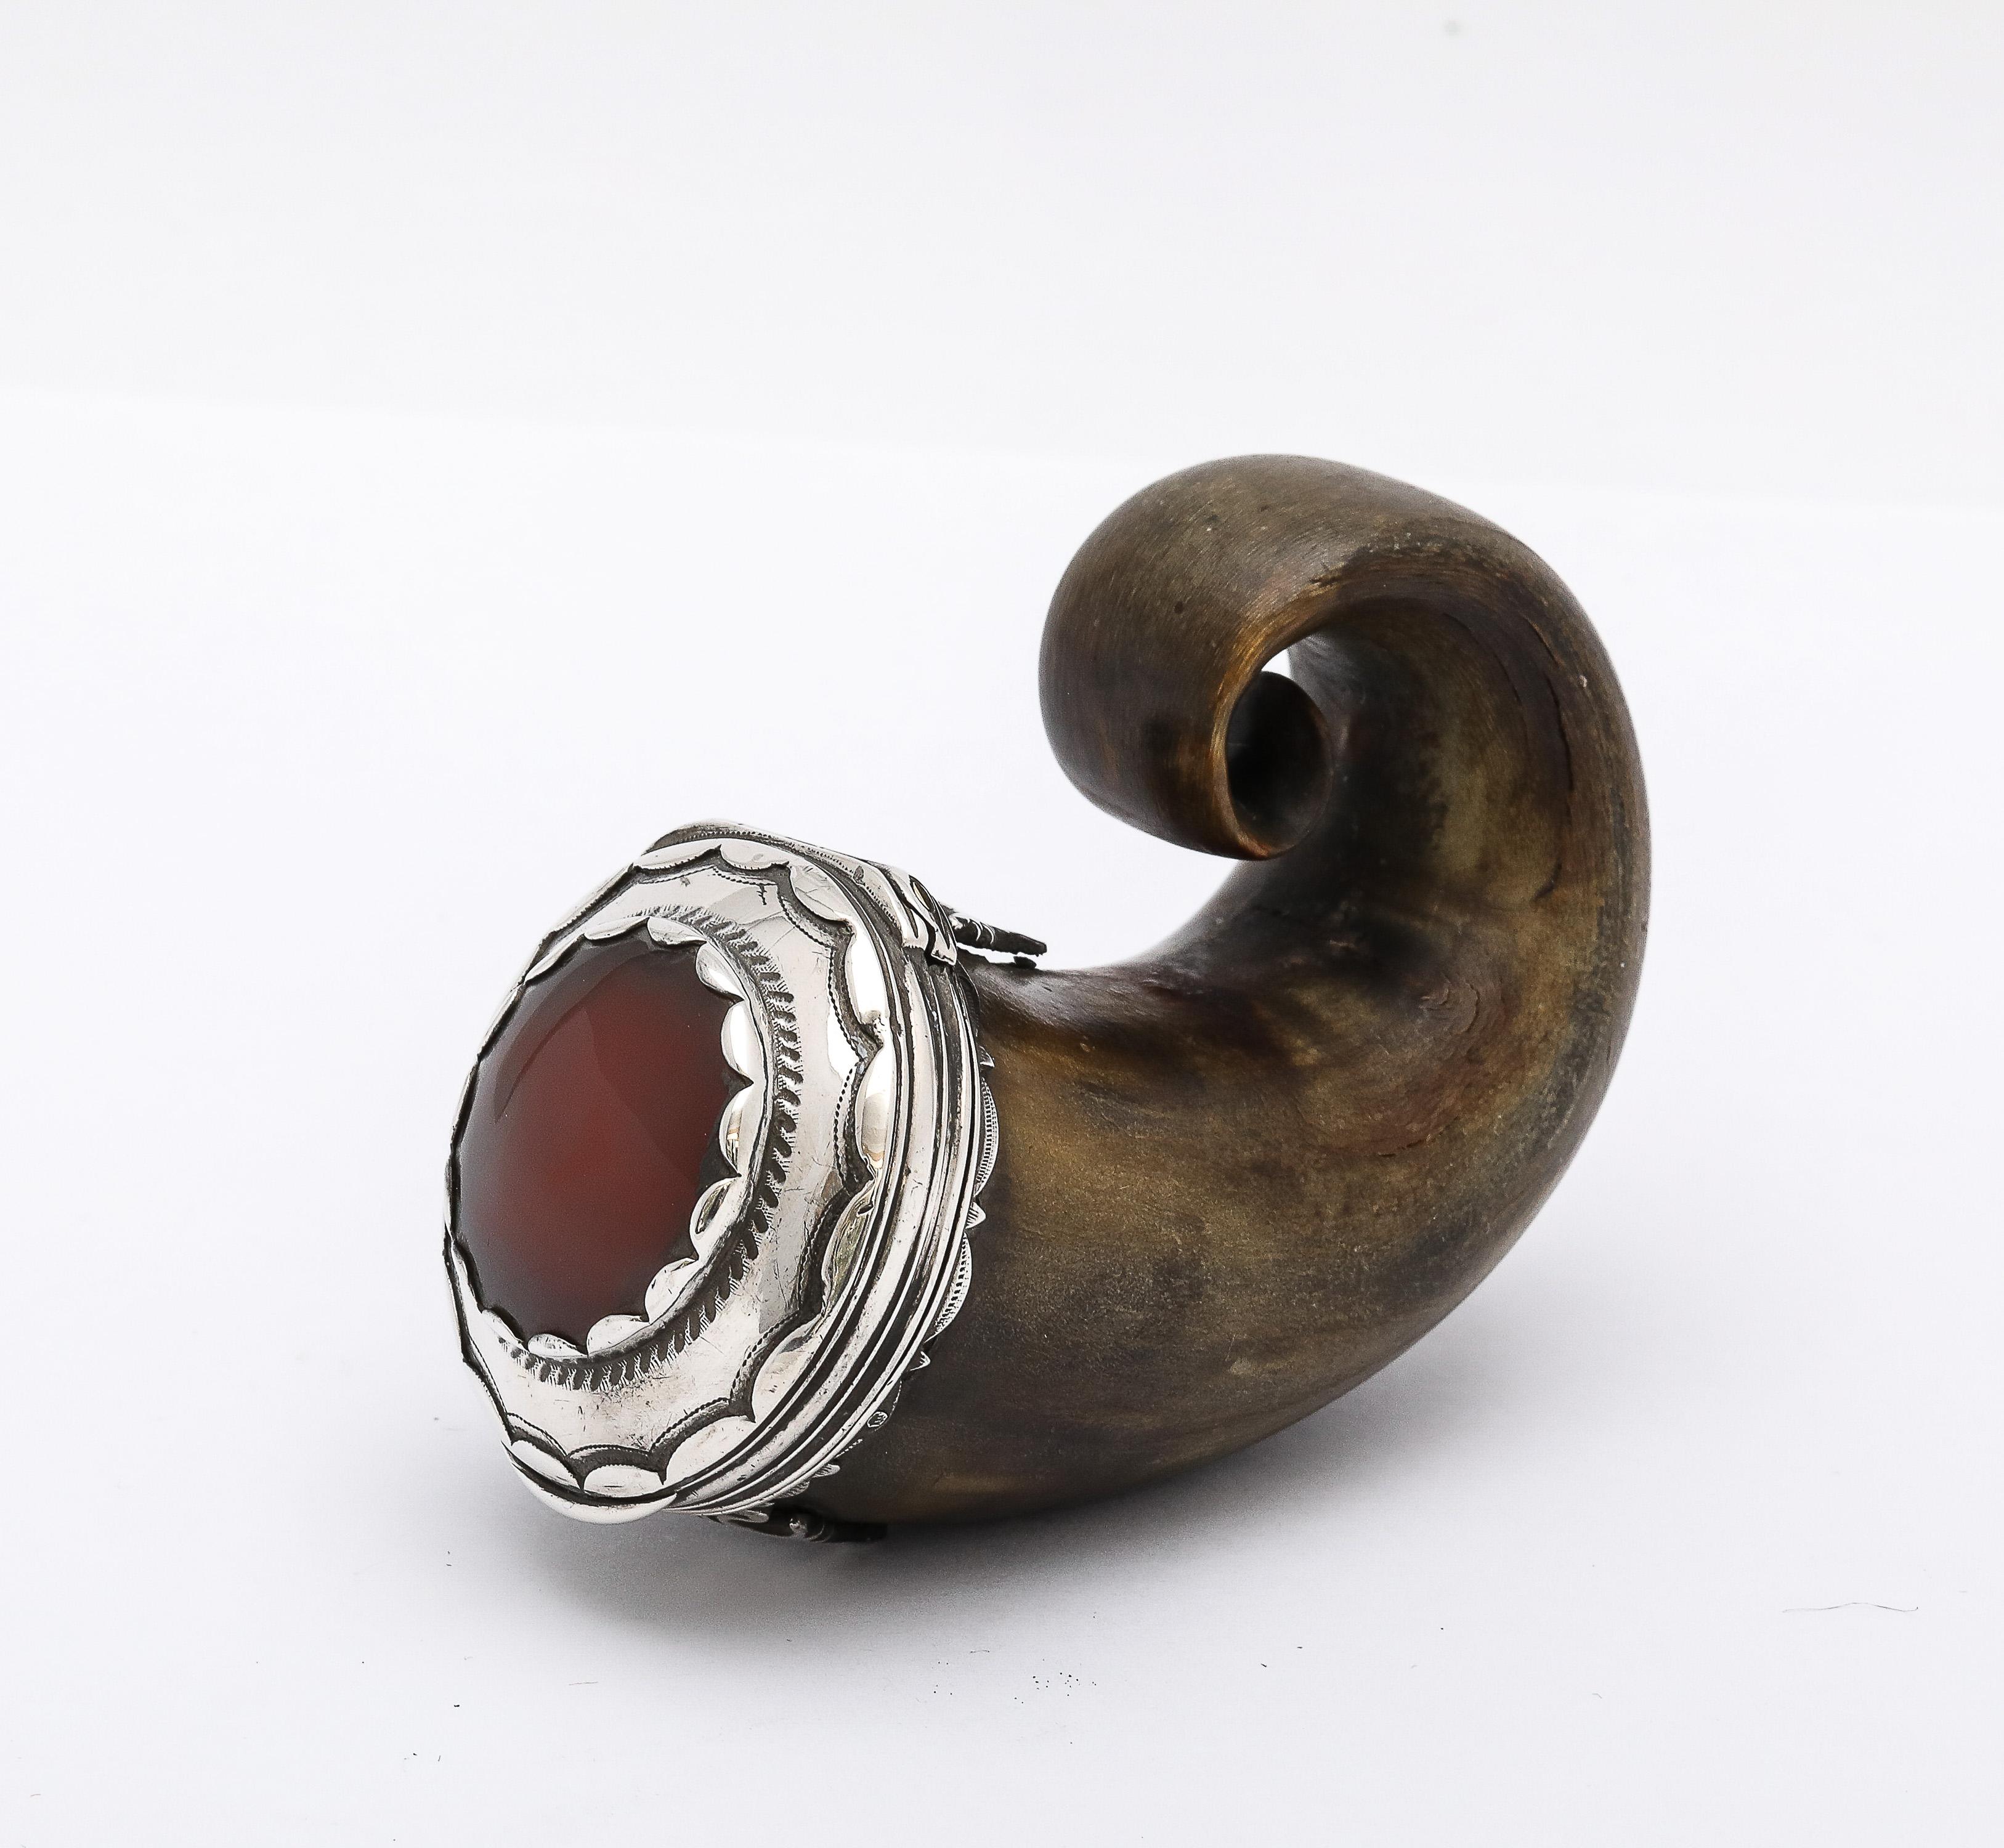 Unusual, rare, Georgian (George III) Period, sterling silver-mounted (unmarked, but tested) ram's horn snuff mull, having a hinged lid with a large carnelian stone central that hinged lid, Scotland, Ca. 1790-1810. Measures 2 3/4 inches high (when